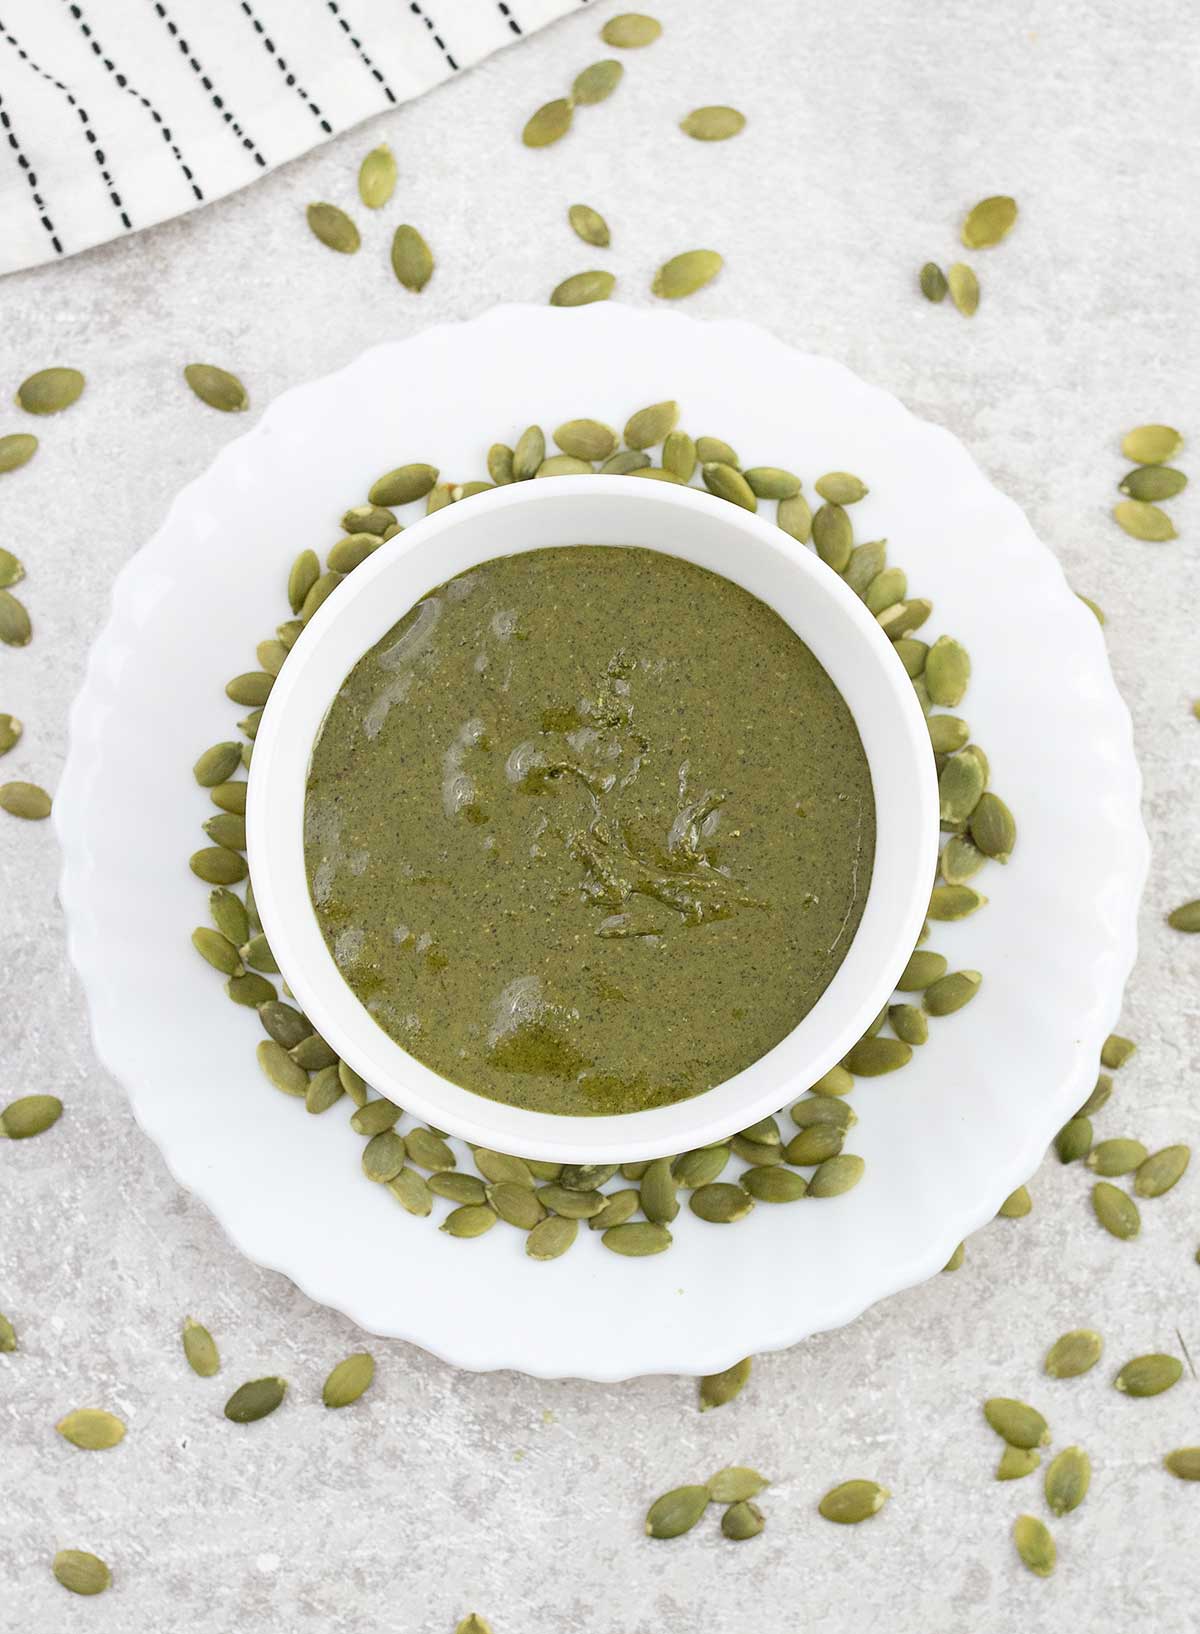 Pumpkin seed butter in a small bowl with pumpkin seeds around it.